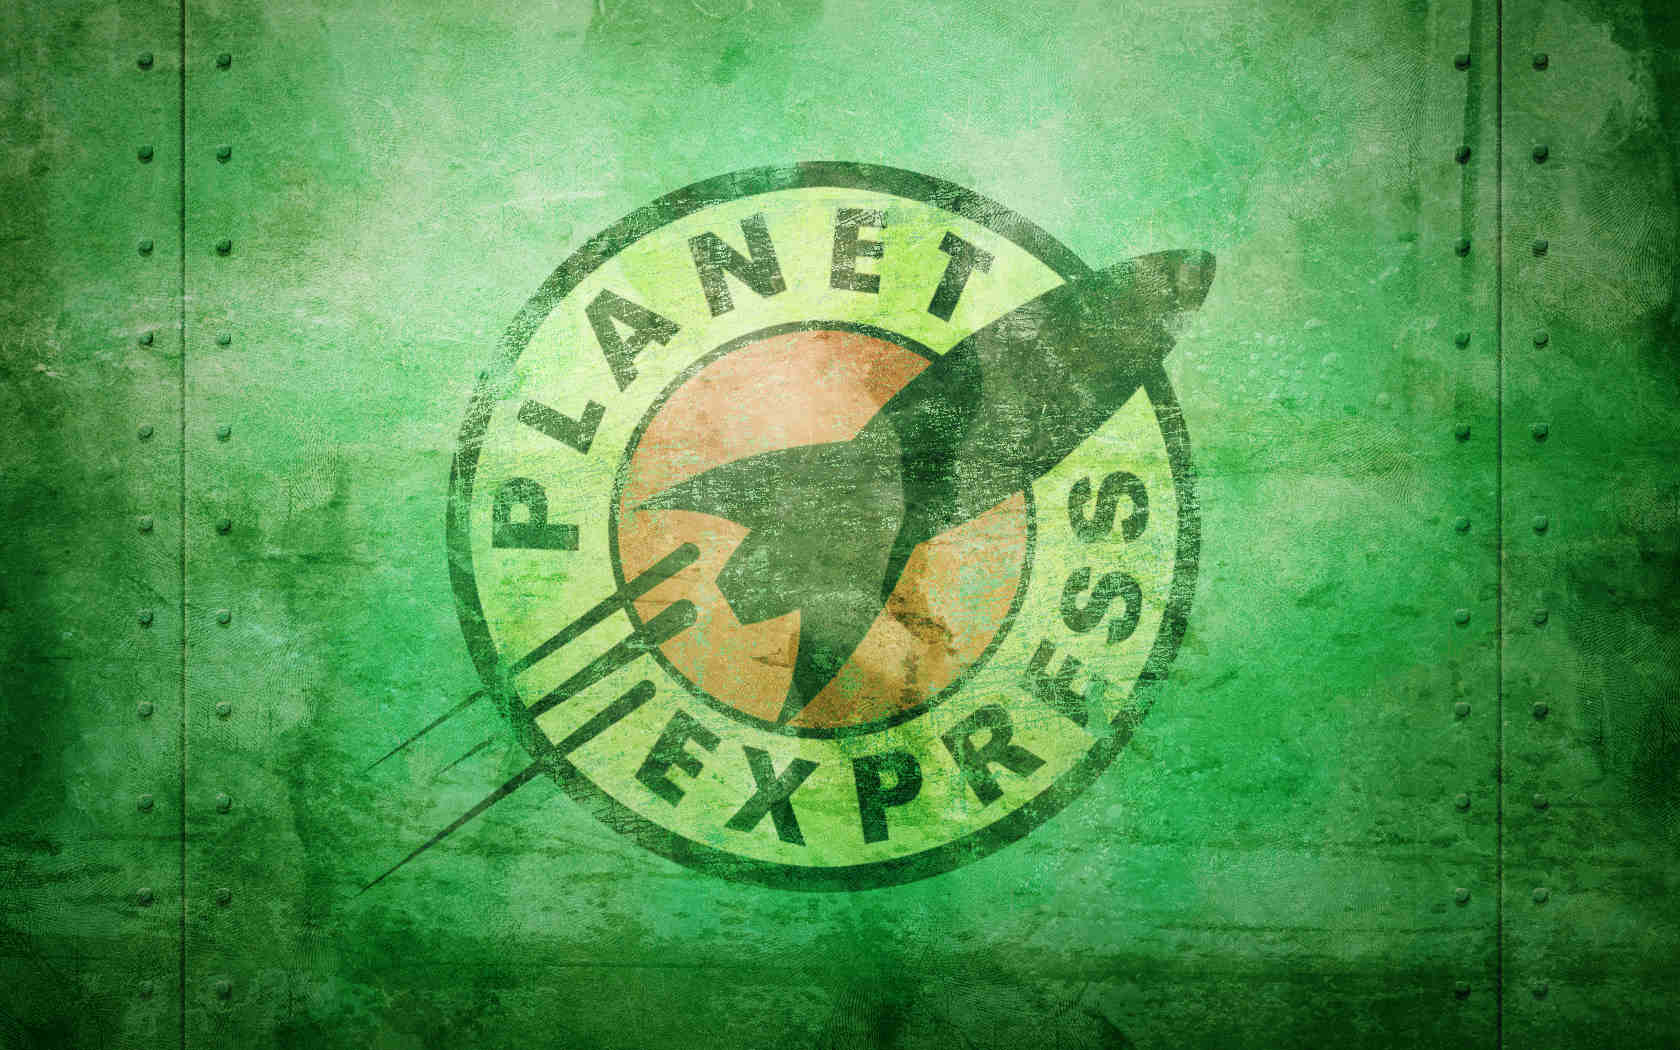  Planet Express Shipping Google Backgrounds Planet Express Shipping